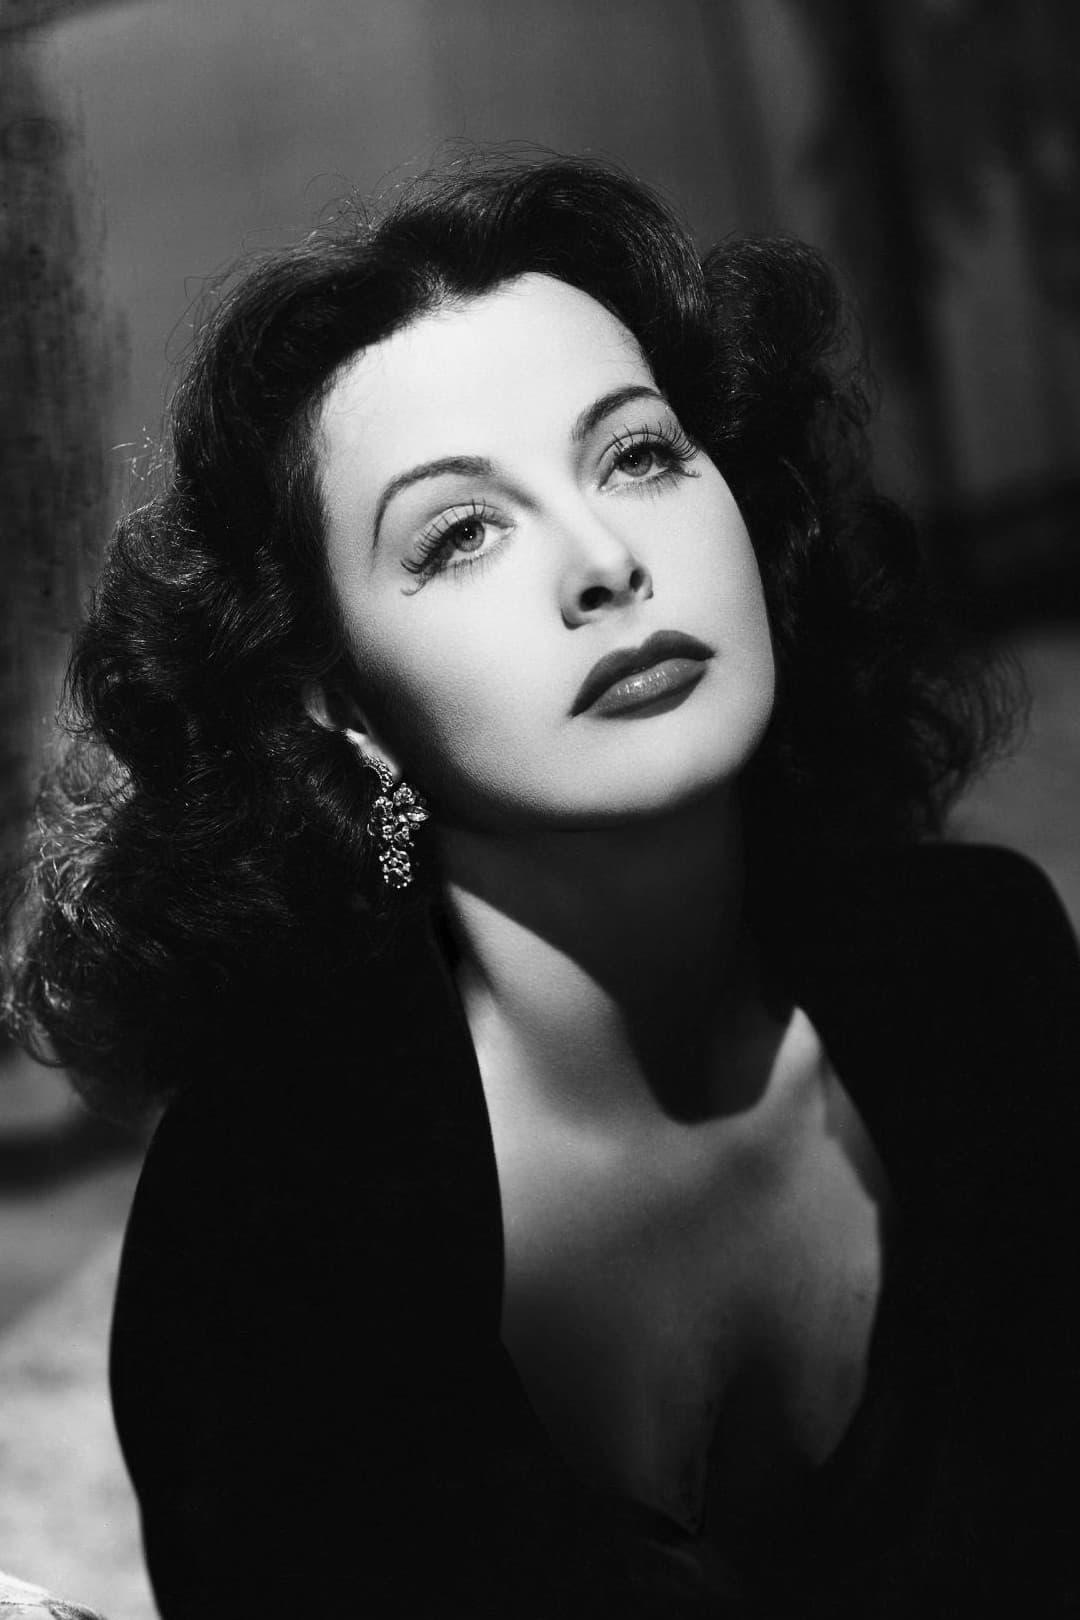 Hedy Lamarr poster